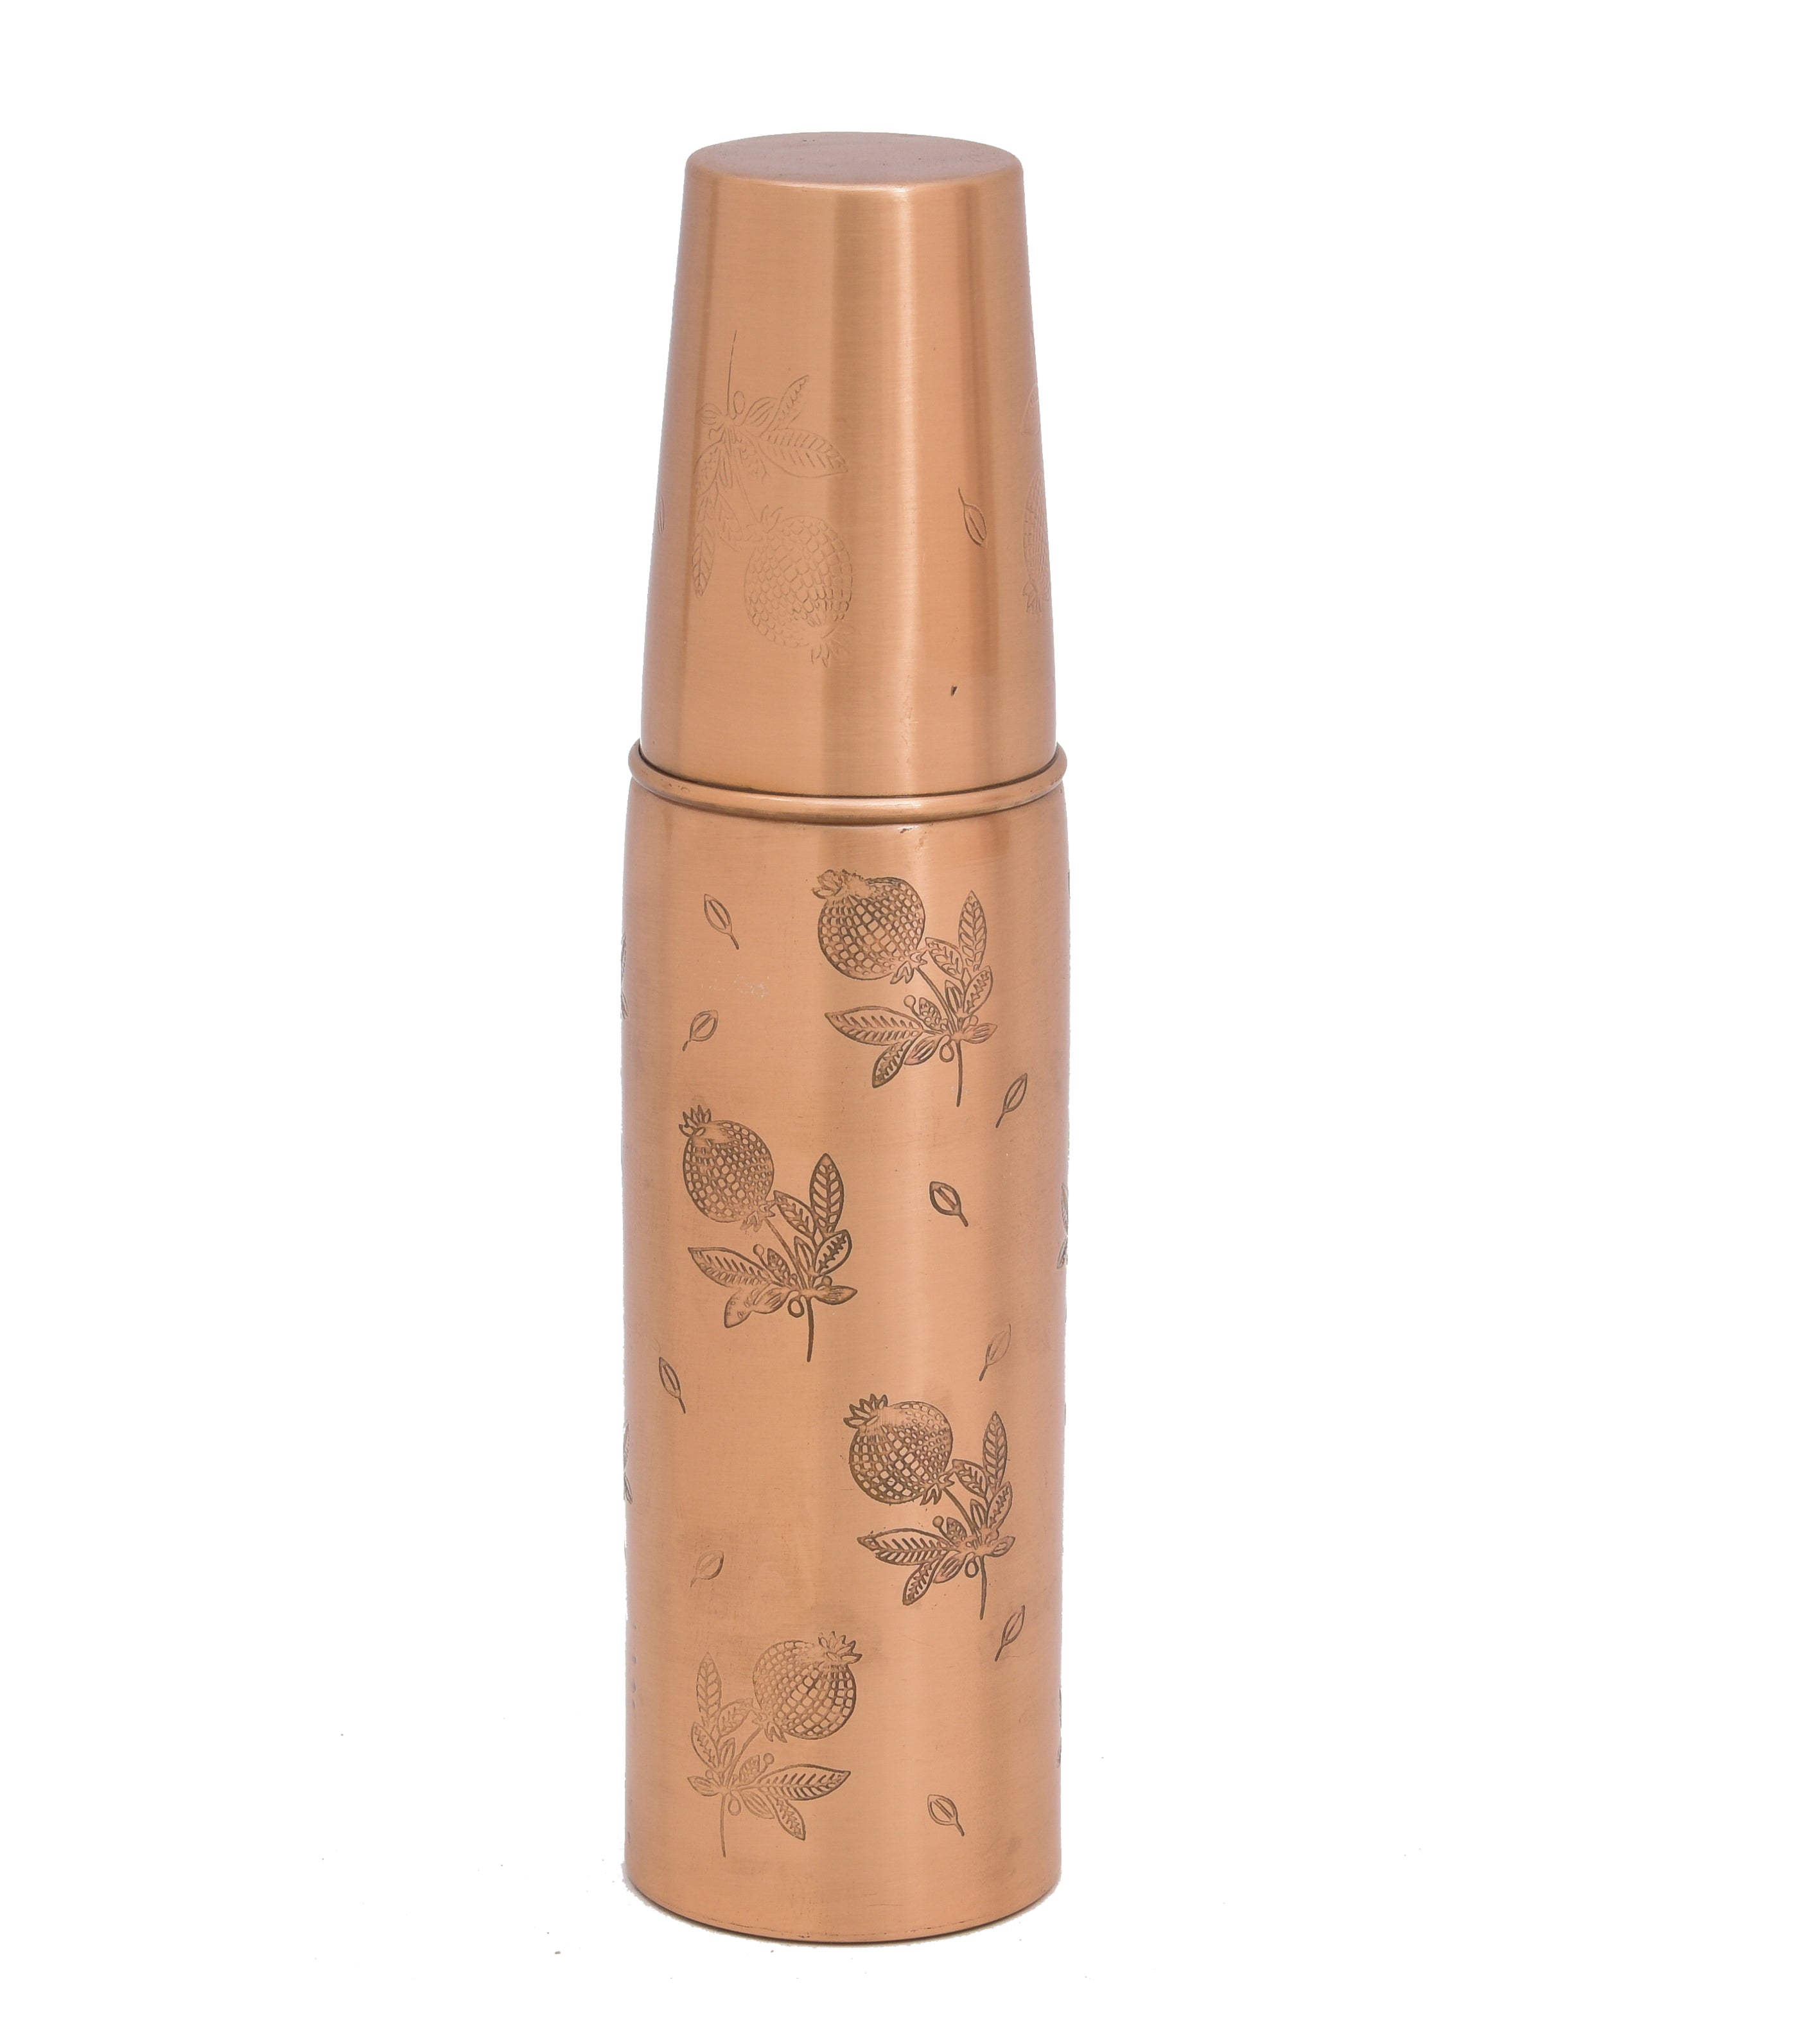 SEMI ANAR PRINTED WATER COPPER BOTTLE WITH GLASS 1000ML